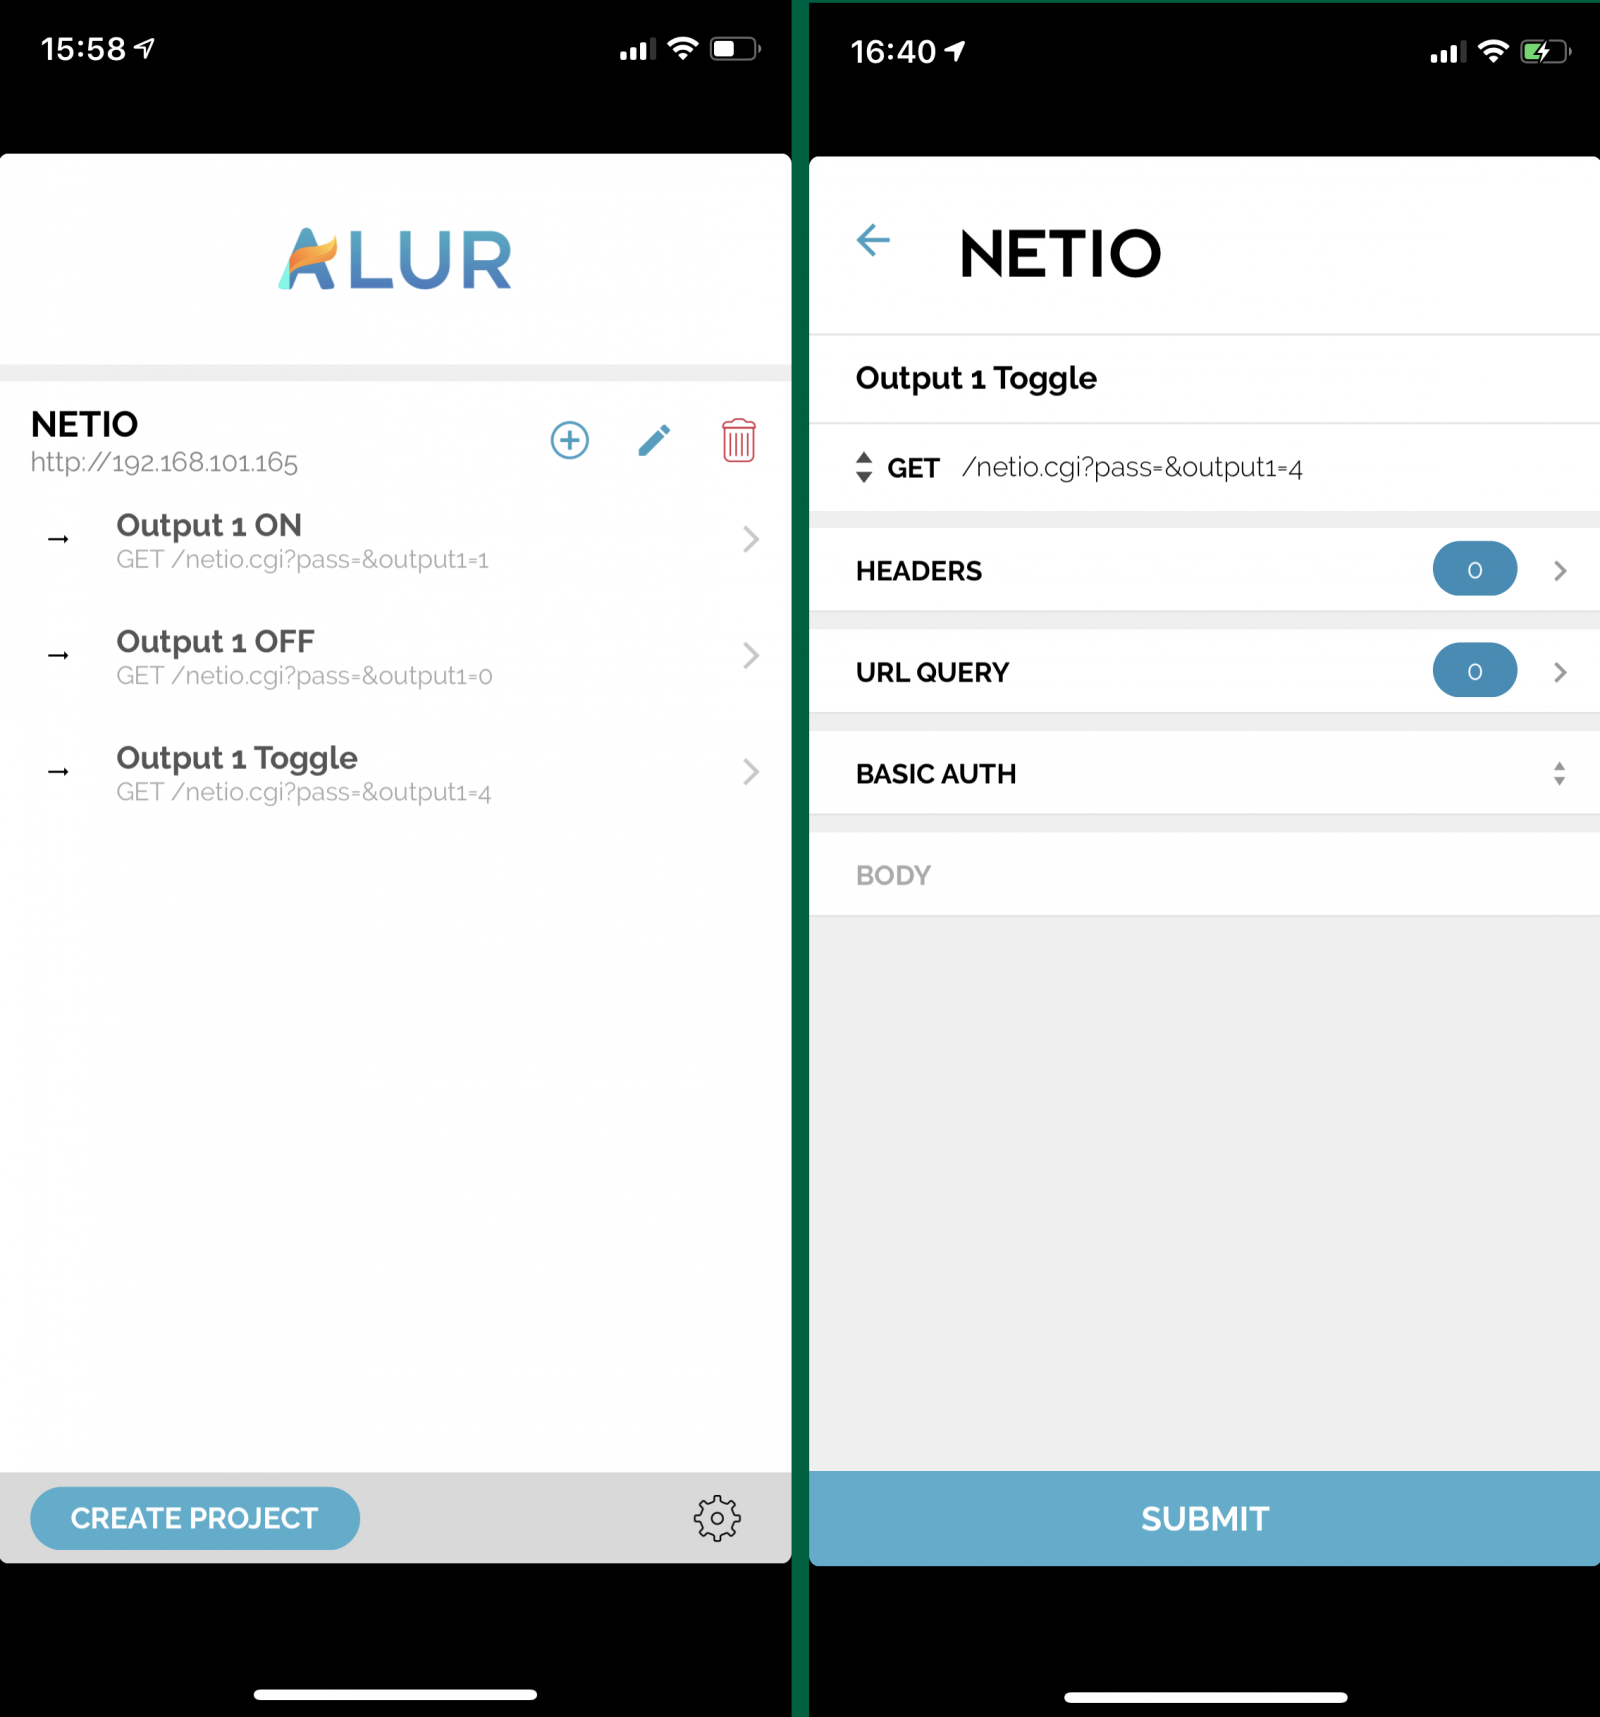 Screenshots of Alur, ios app for controlling NETIO networked smart power sockets